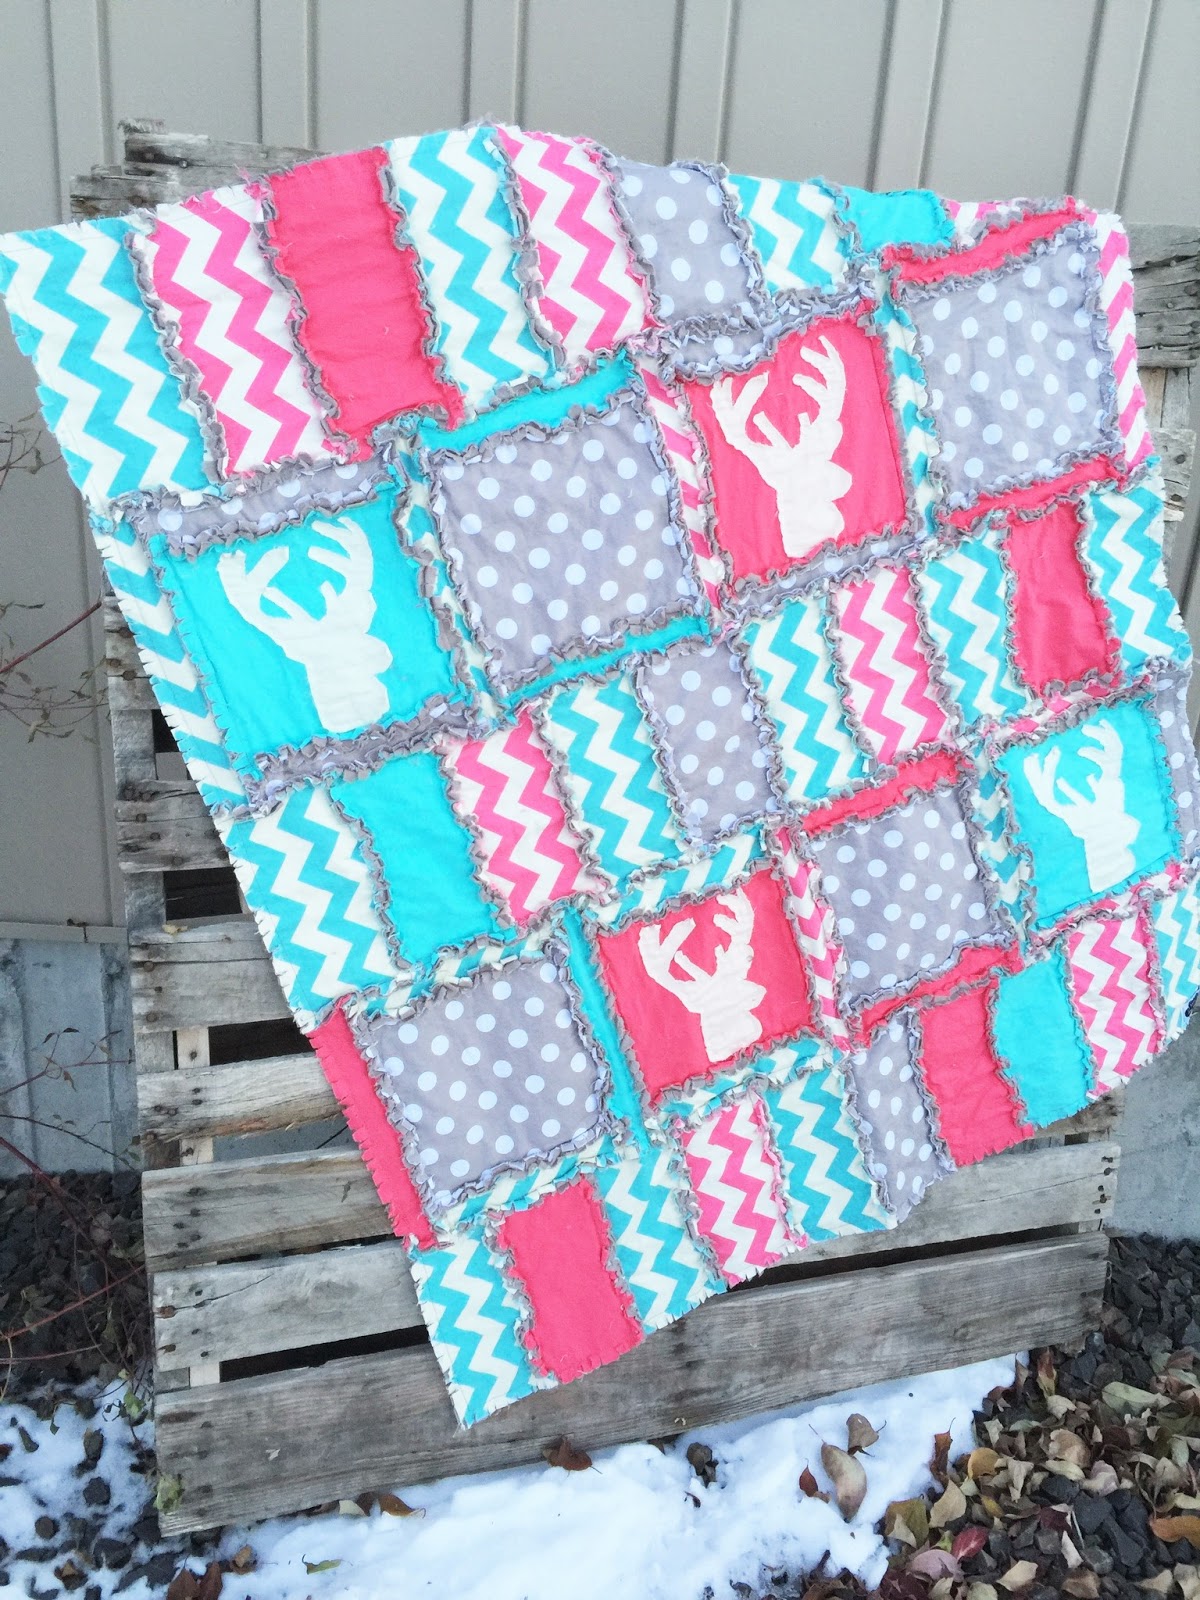 Woodland Baby Girl Quilts And Nursery Bedding With Deer Heads A Vision To Remember All Things Handmade Blog Woodland Baby Girl Quilts And Nursery Bedding With Deer Heads